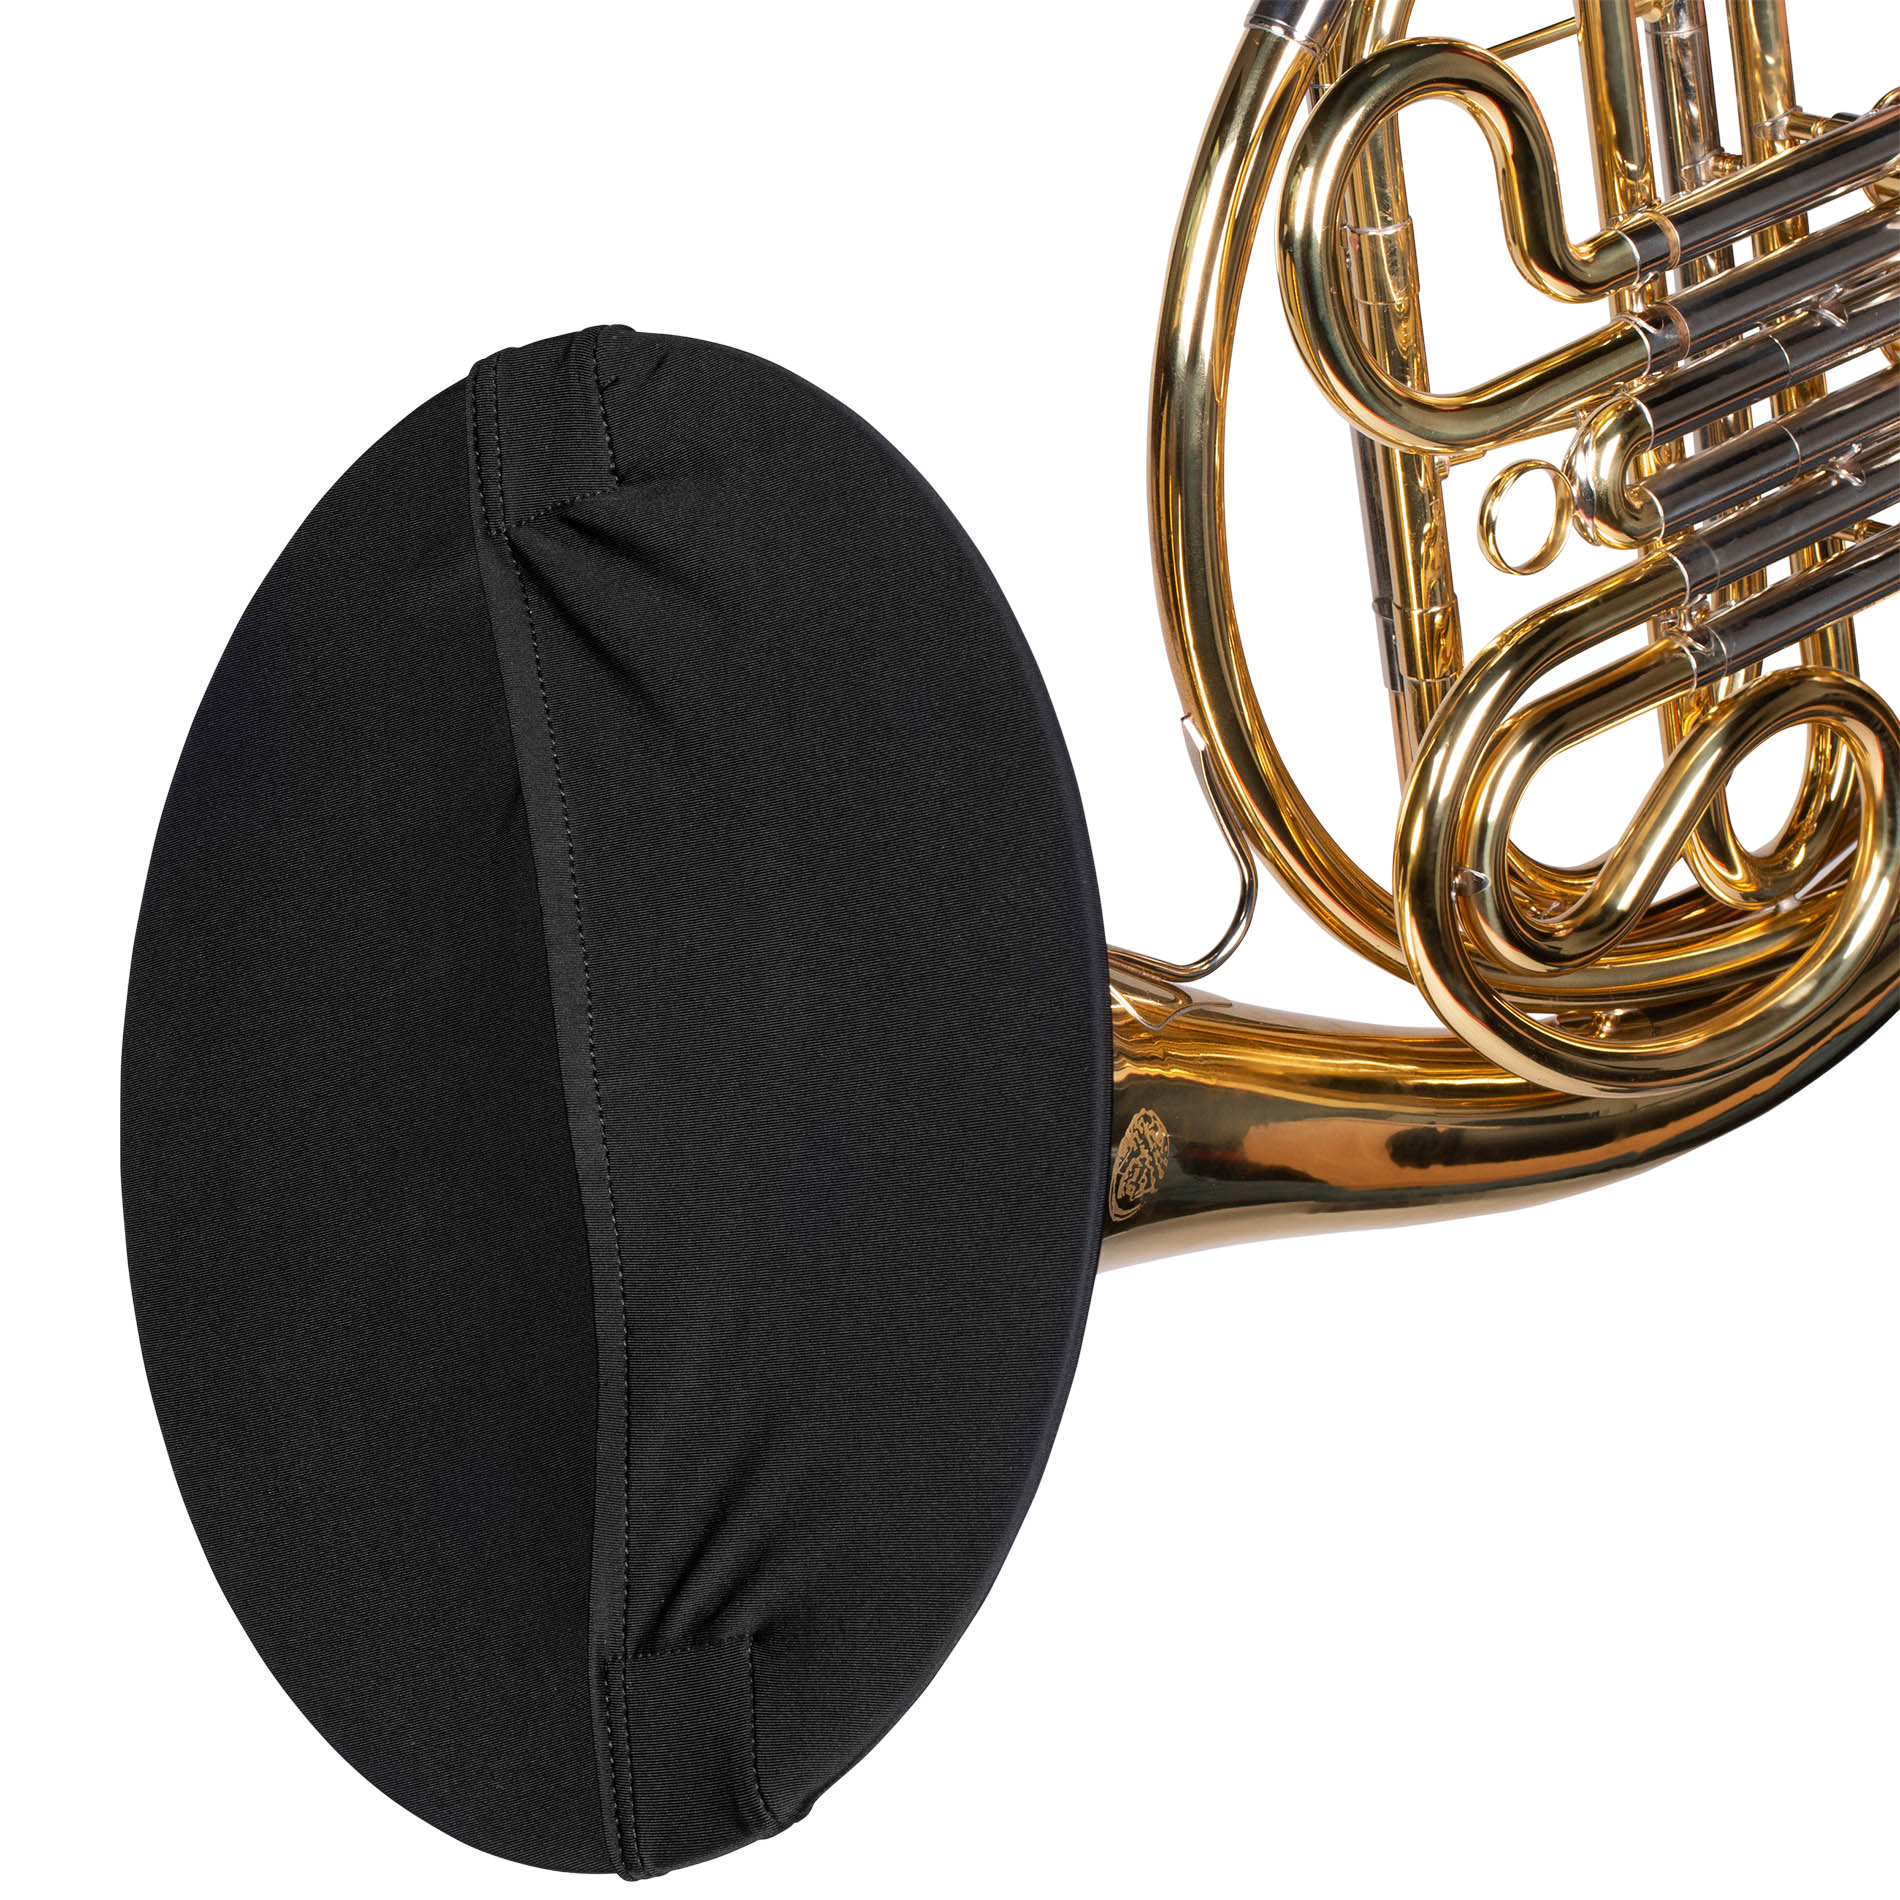 French Horn Bell Cover with Hand Access, 11-13″-GBELLCVR1113FHBK